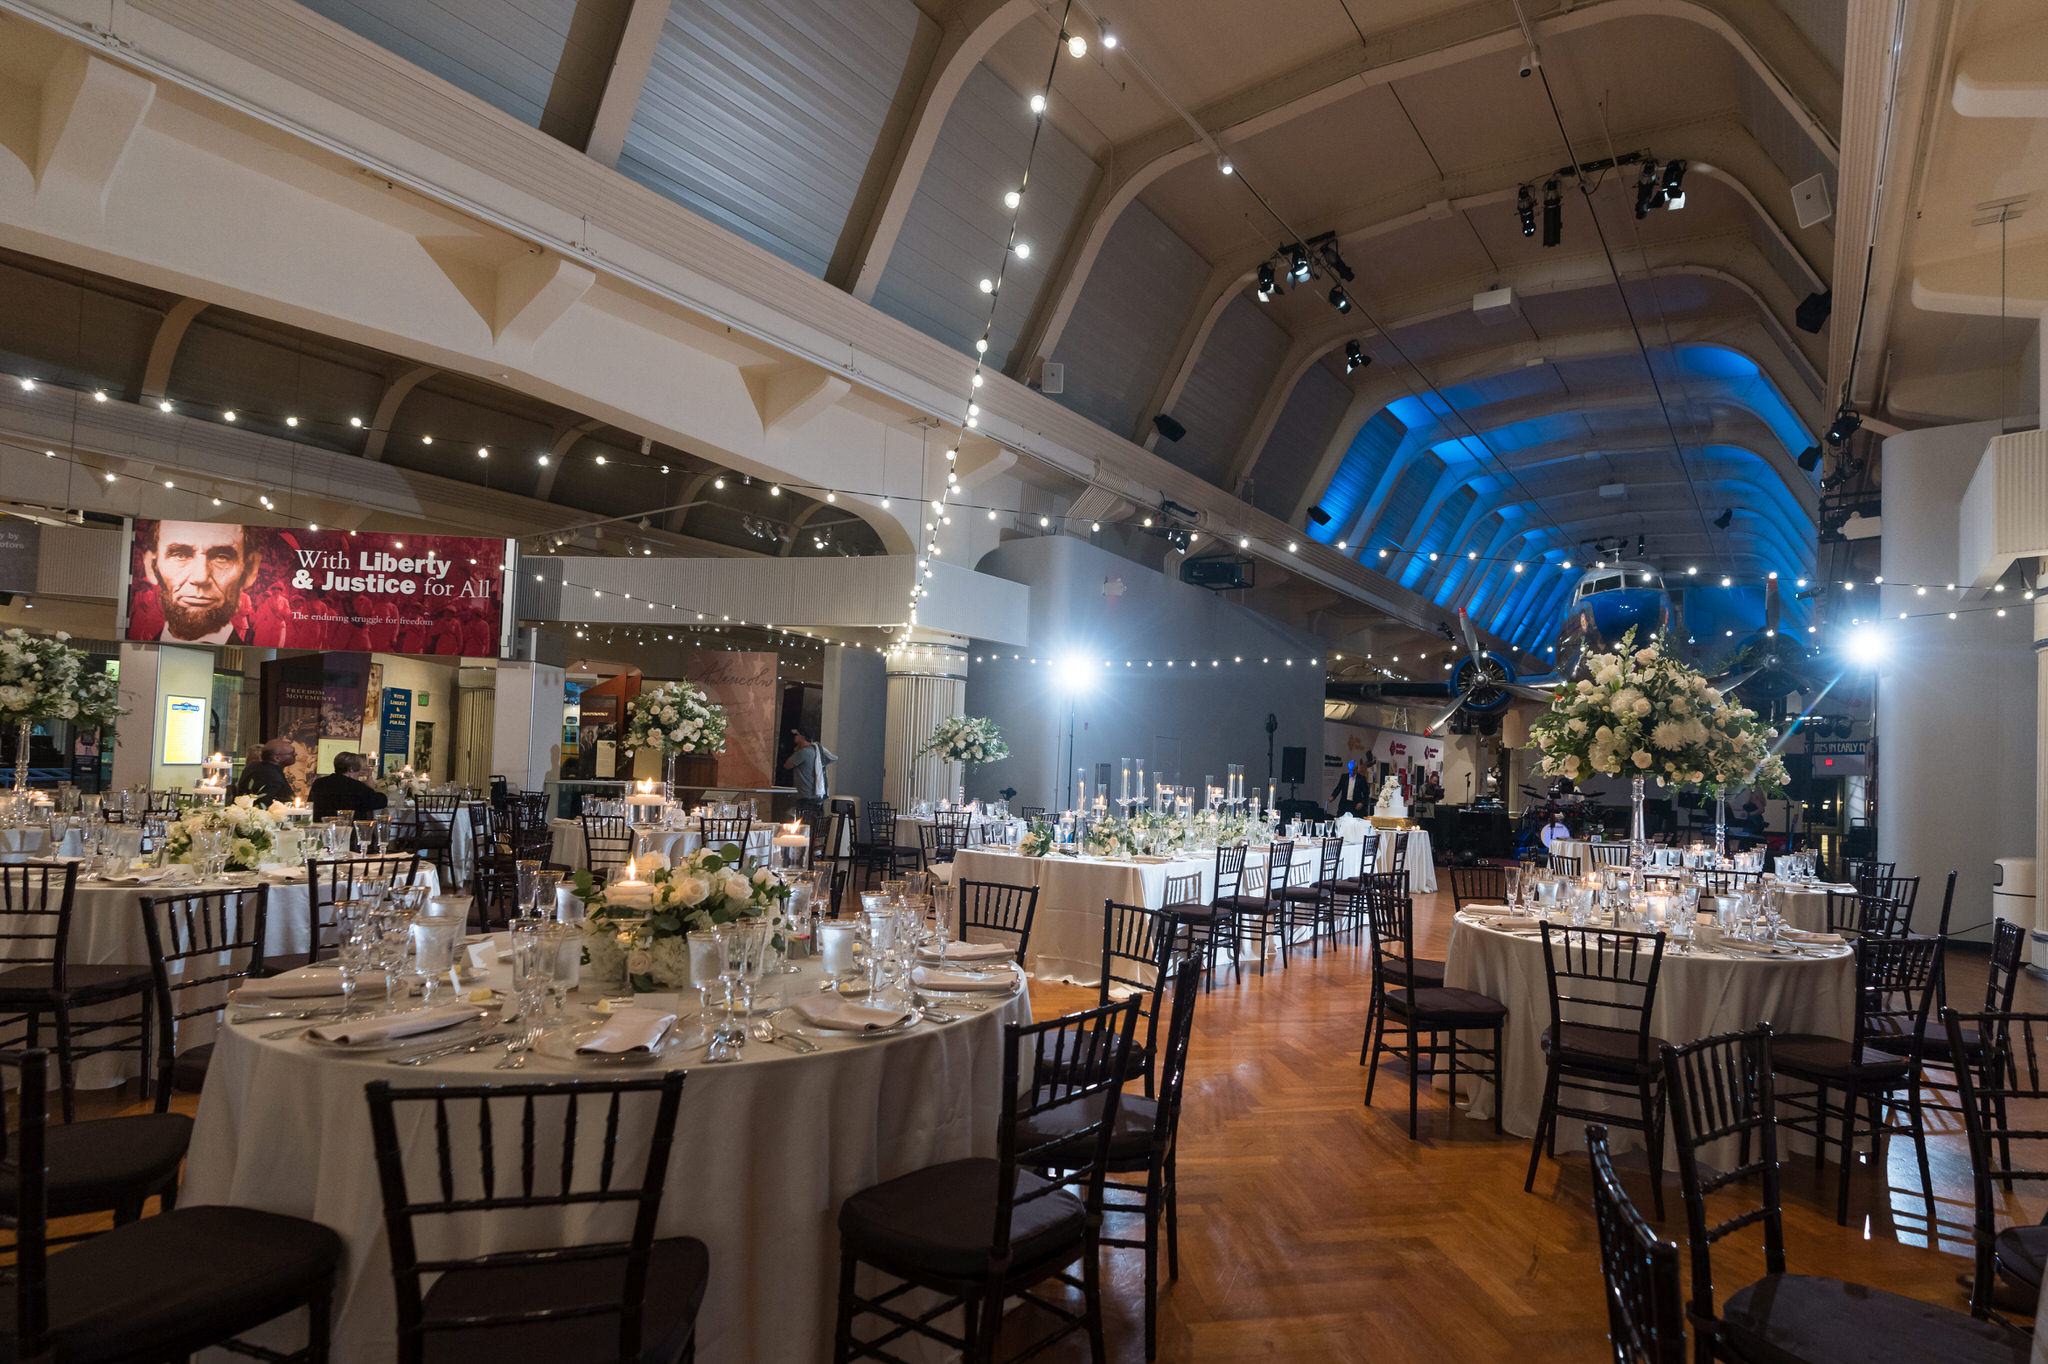 A Henry Ford Museum wedding reception set up.  